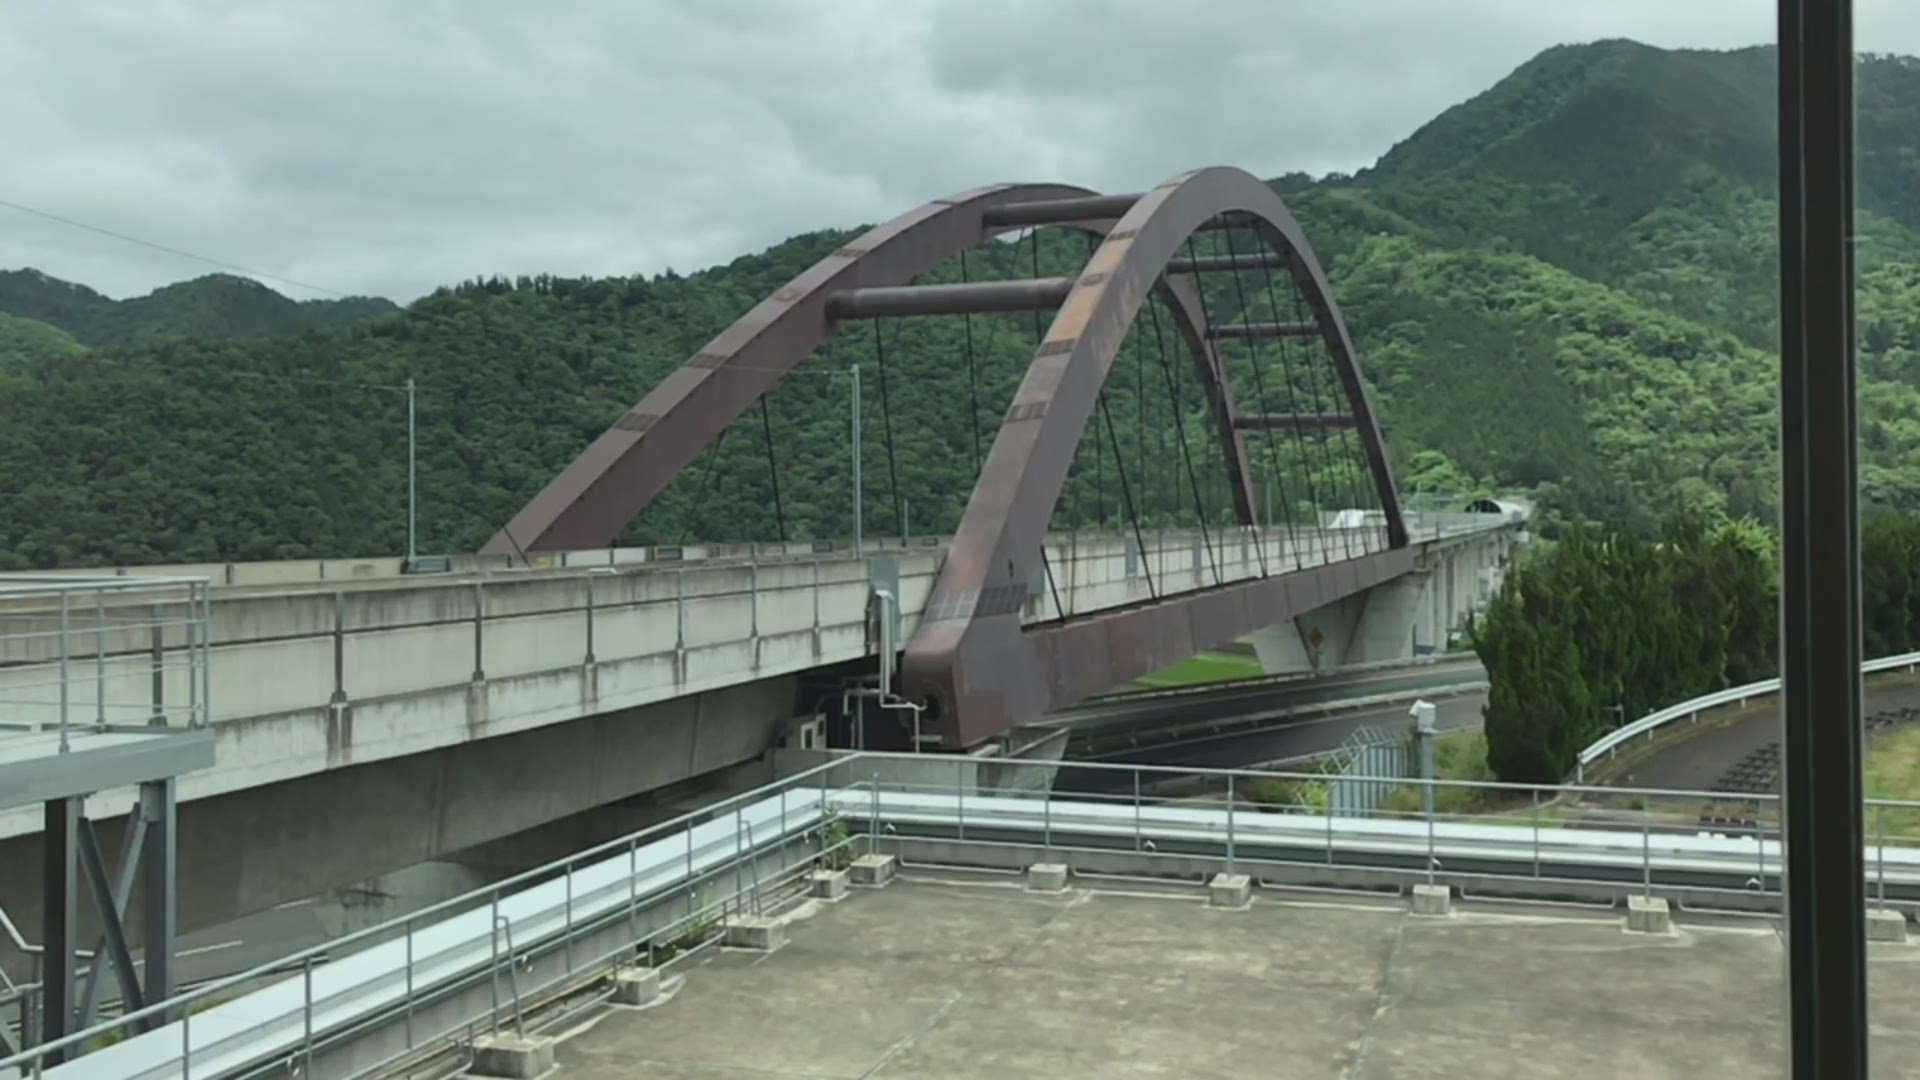 WUSA9 visited the world's only operational SCMaglev track in Yamanashi, Japan, June 10, 2019.